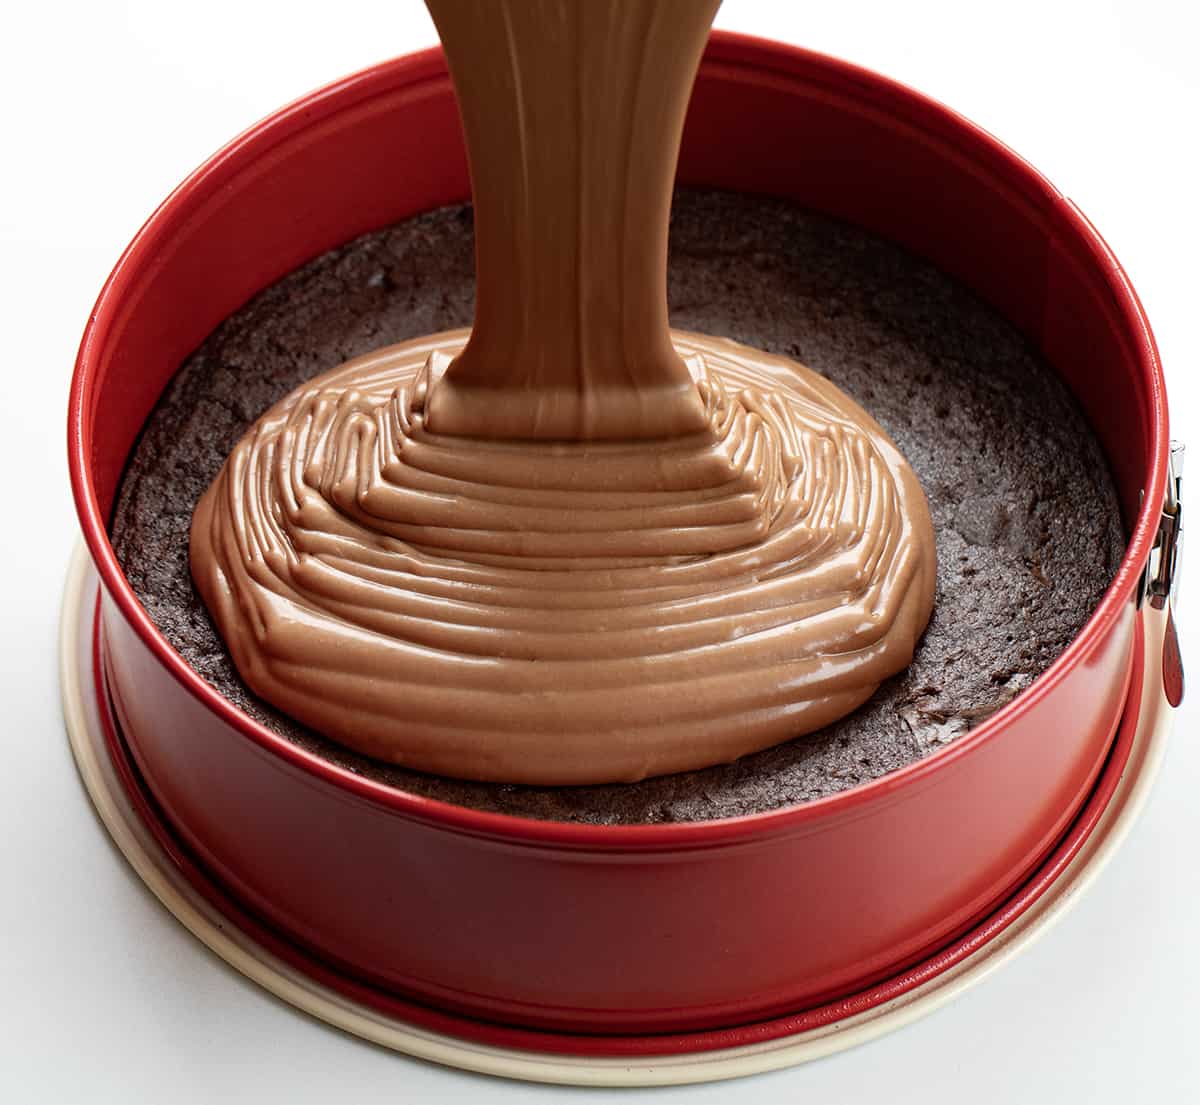 Pouring Chocolate Cheesecake Over Baked Brownie to Make Brownie Bottom Chocolate Cheesecake.